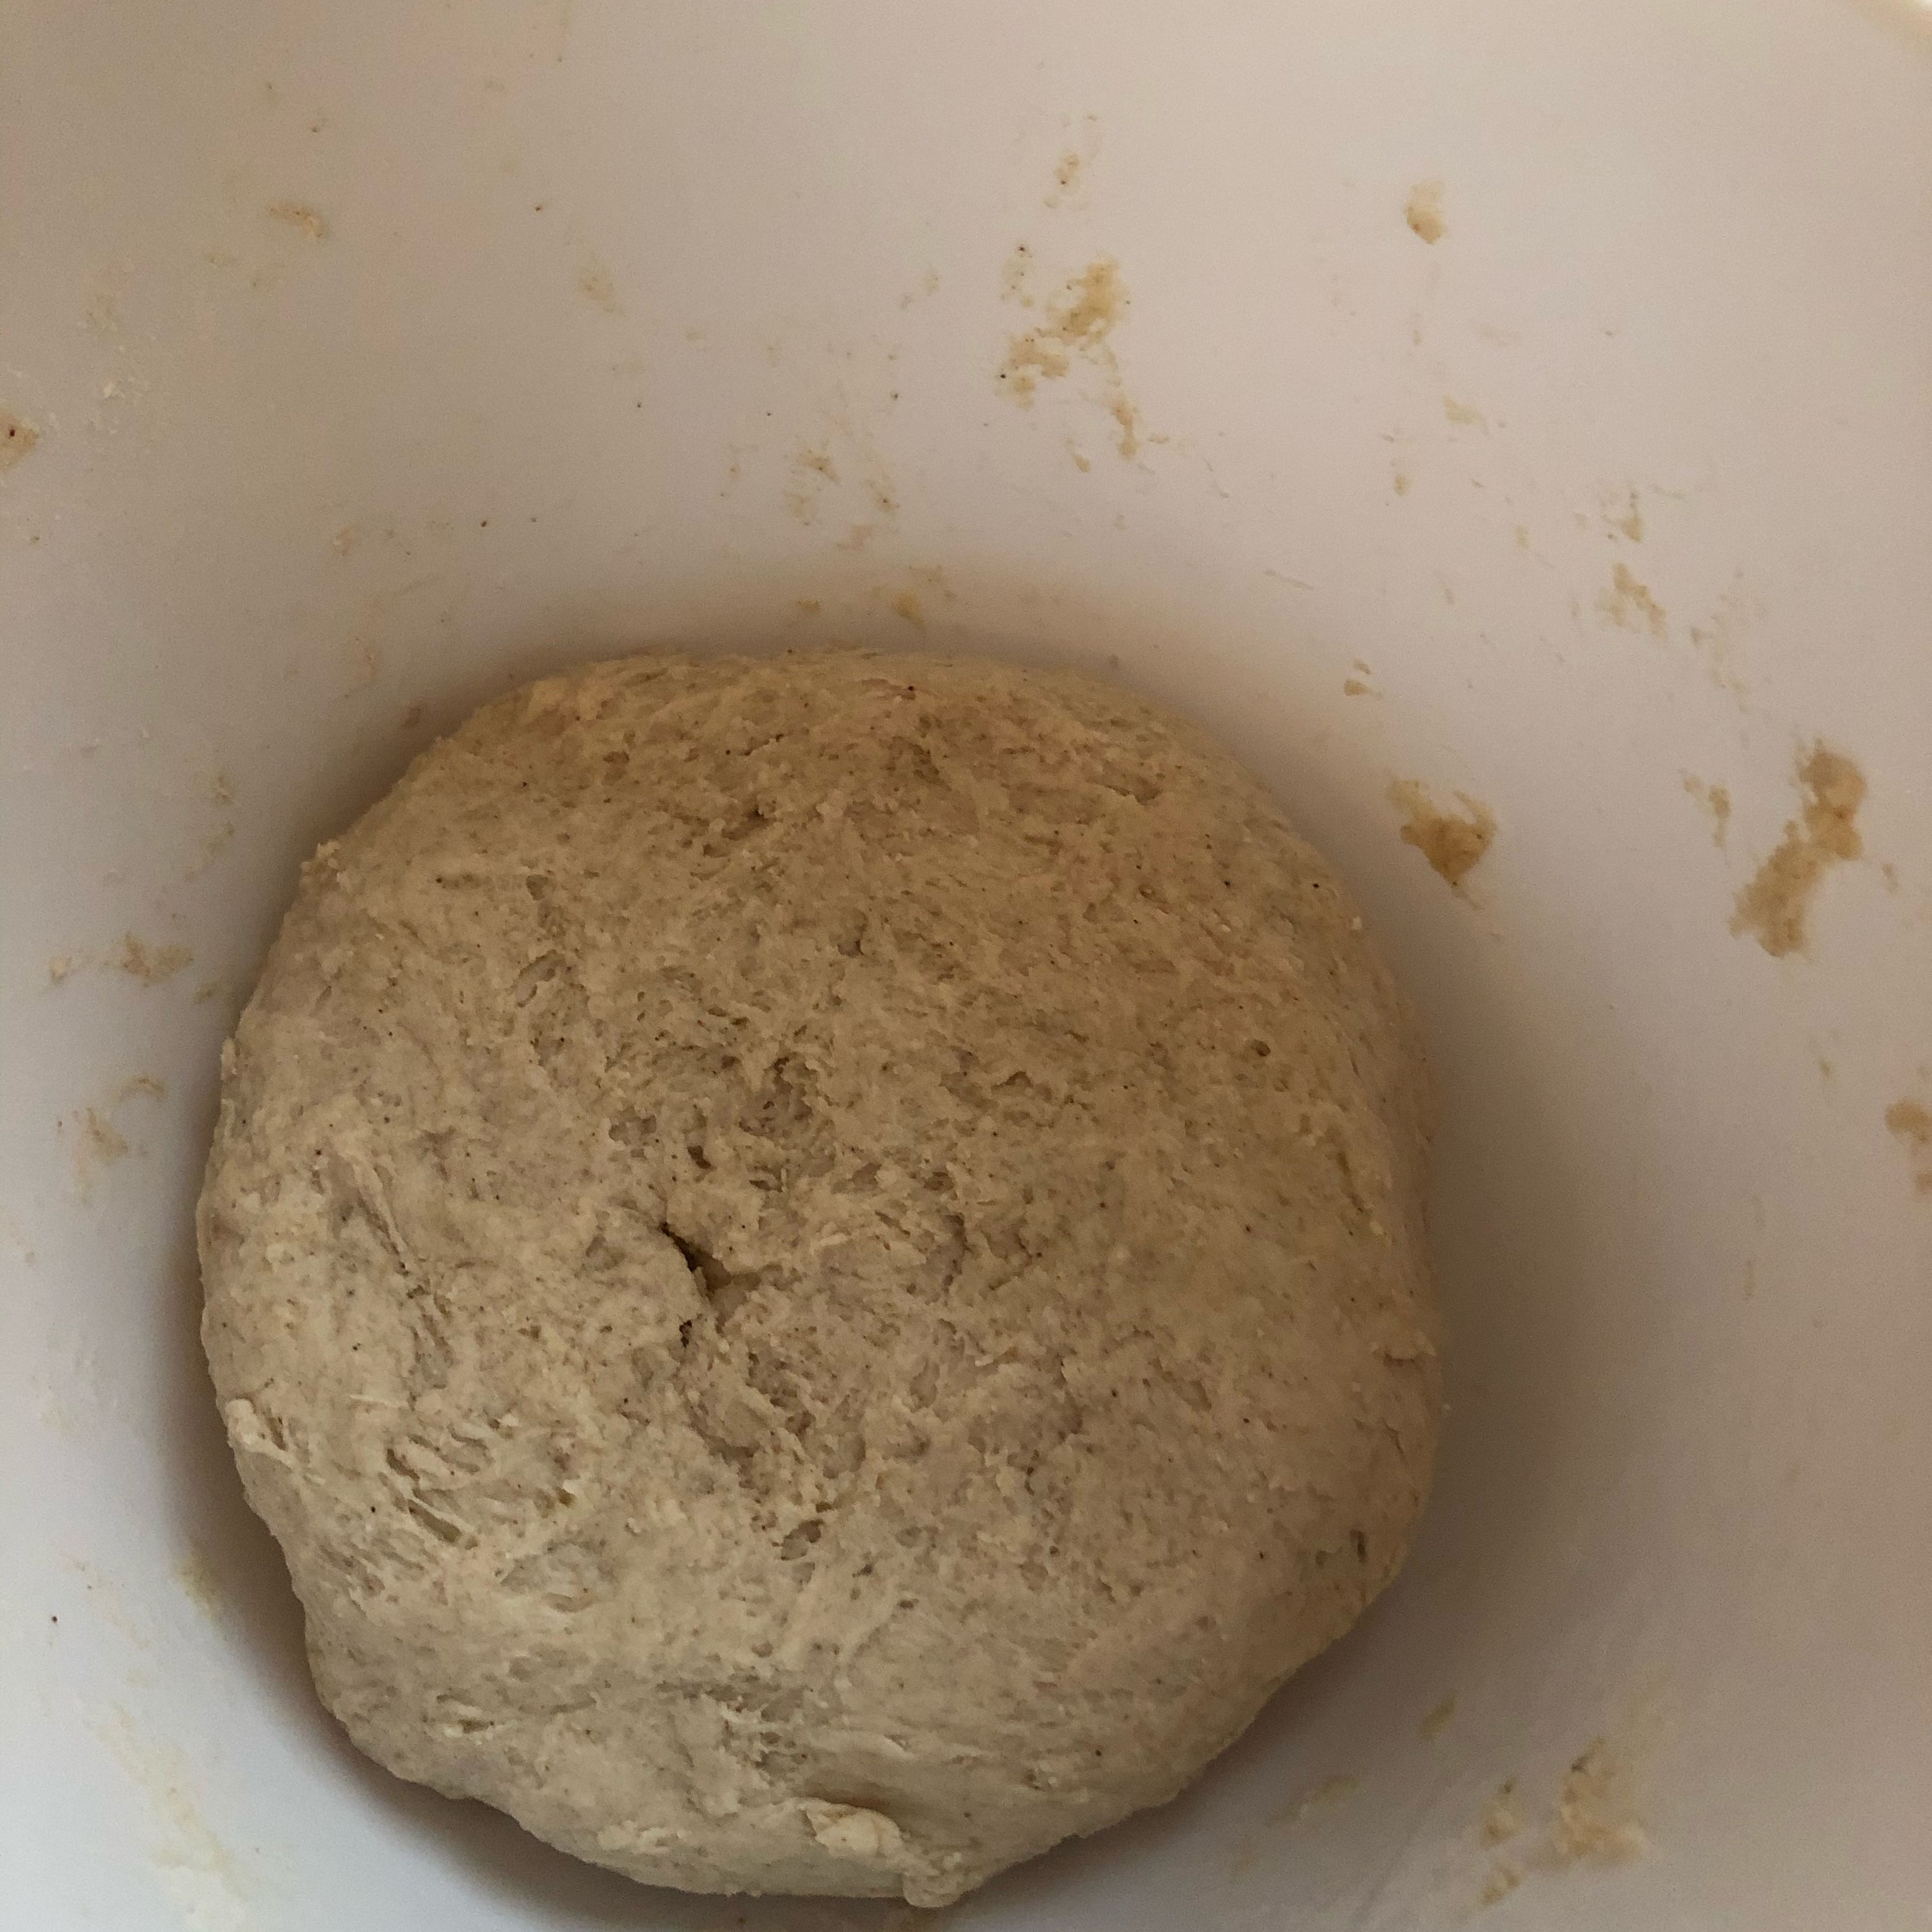  your dough is ready